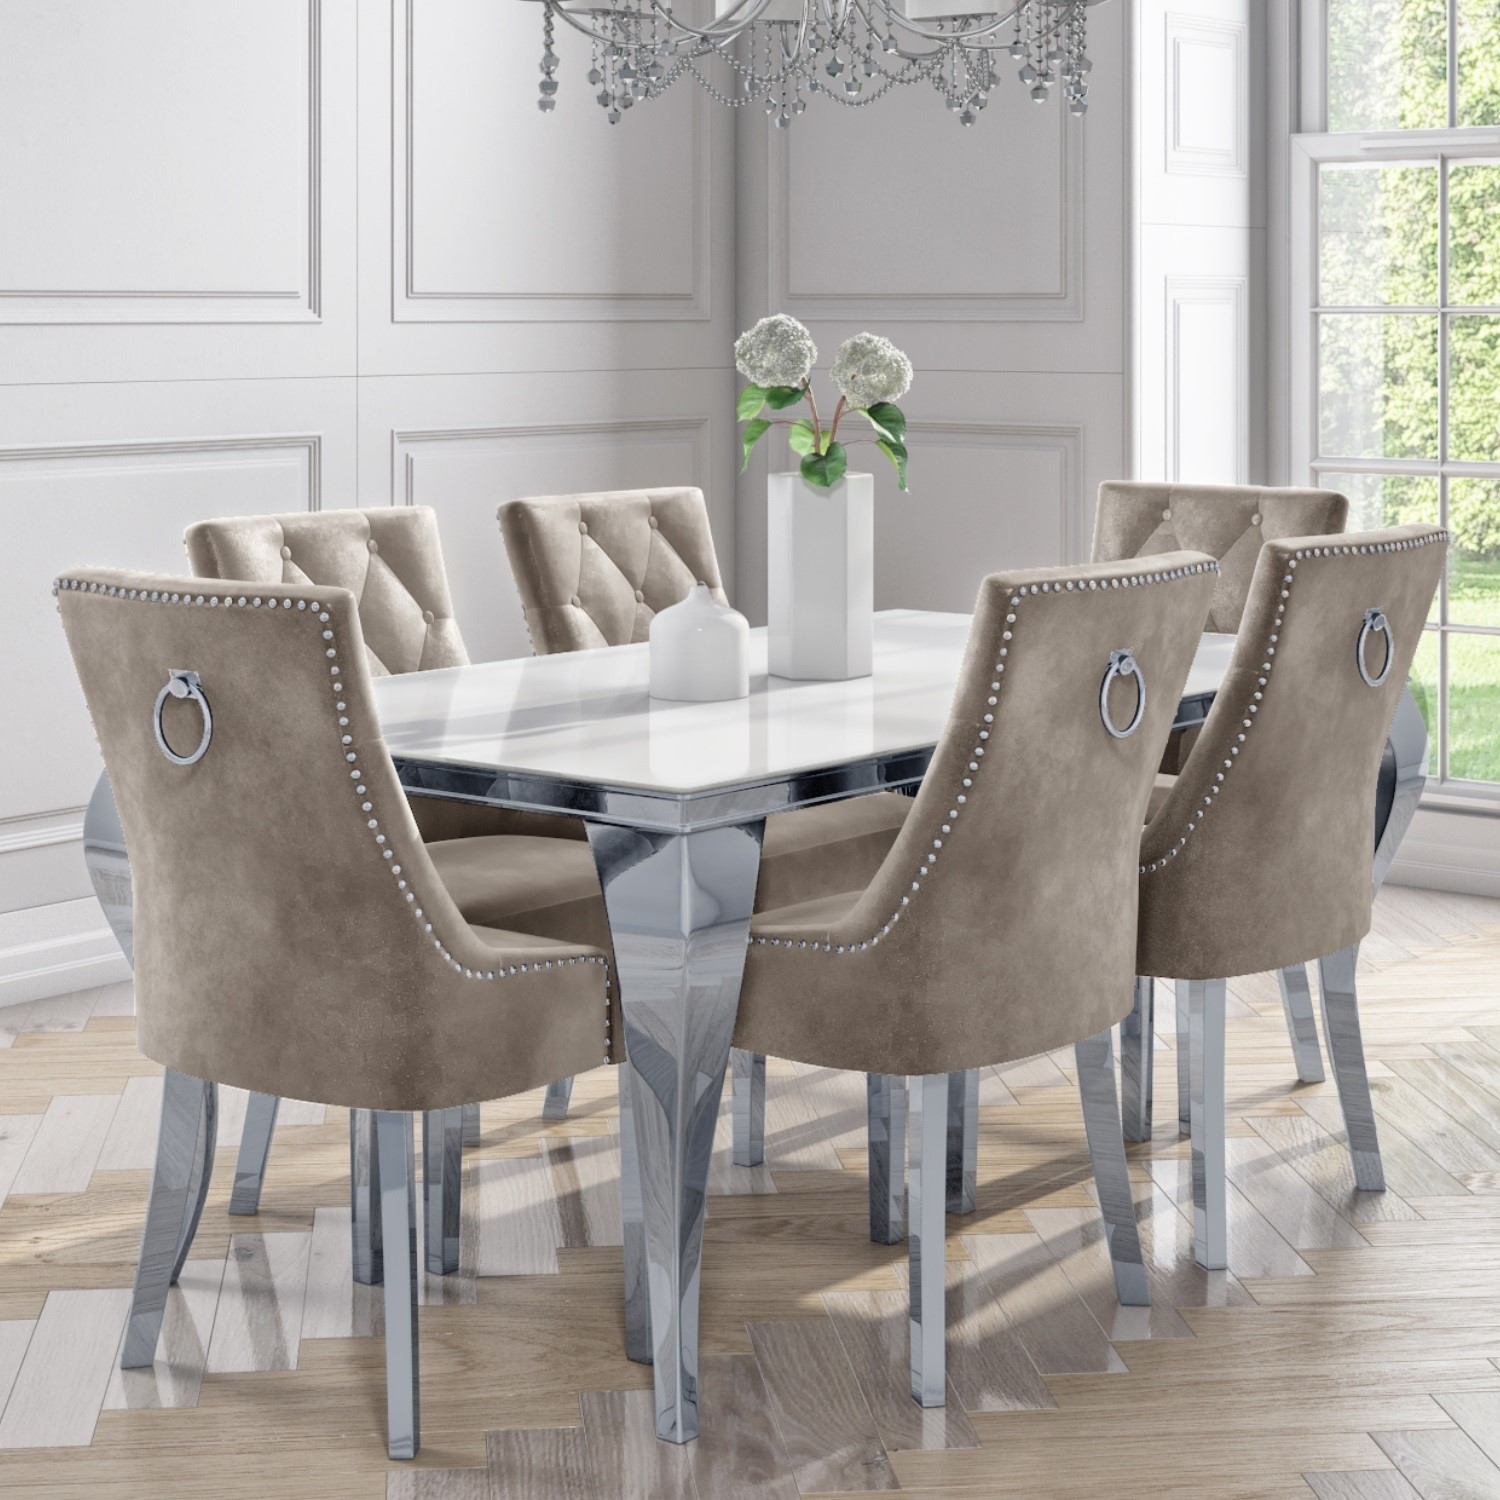 Mirrored Dining Table With 6 Chairs In Mink Jade Boutique Furniture123